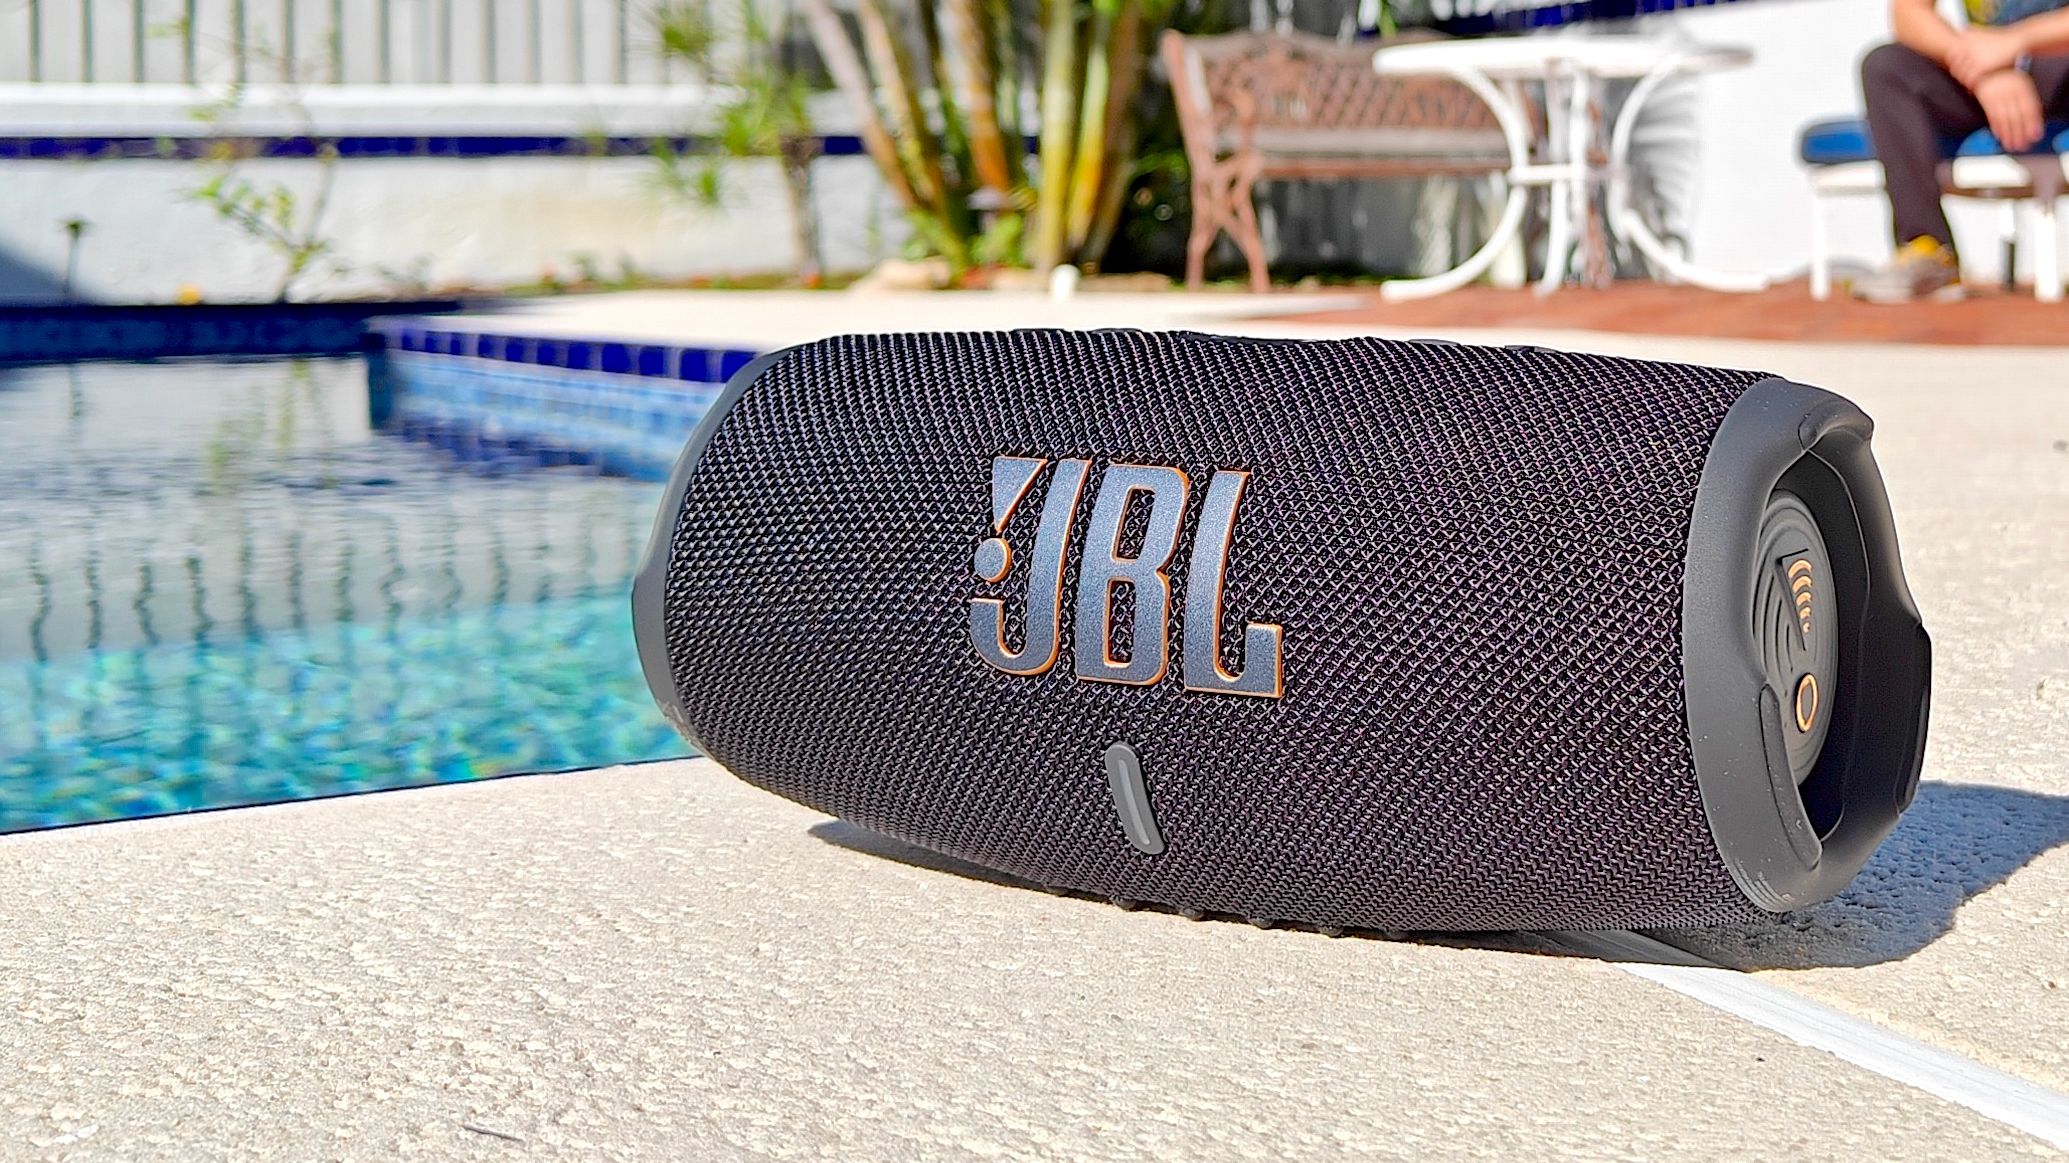 JBL Boost TV review: There are great small speakers. This isn't one.